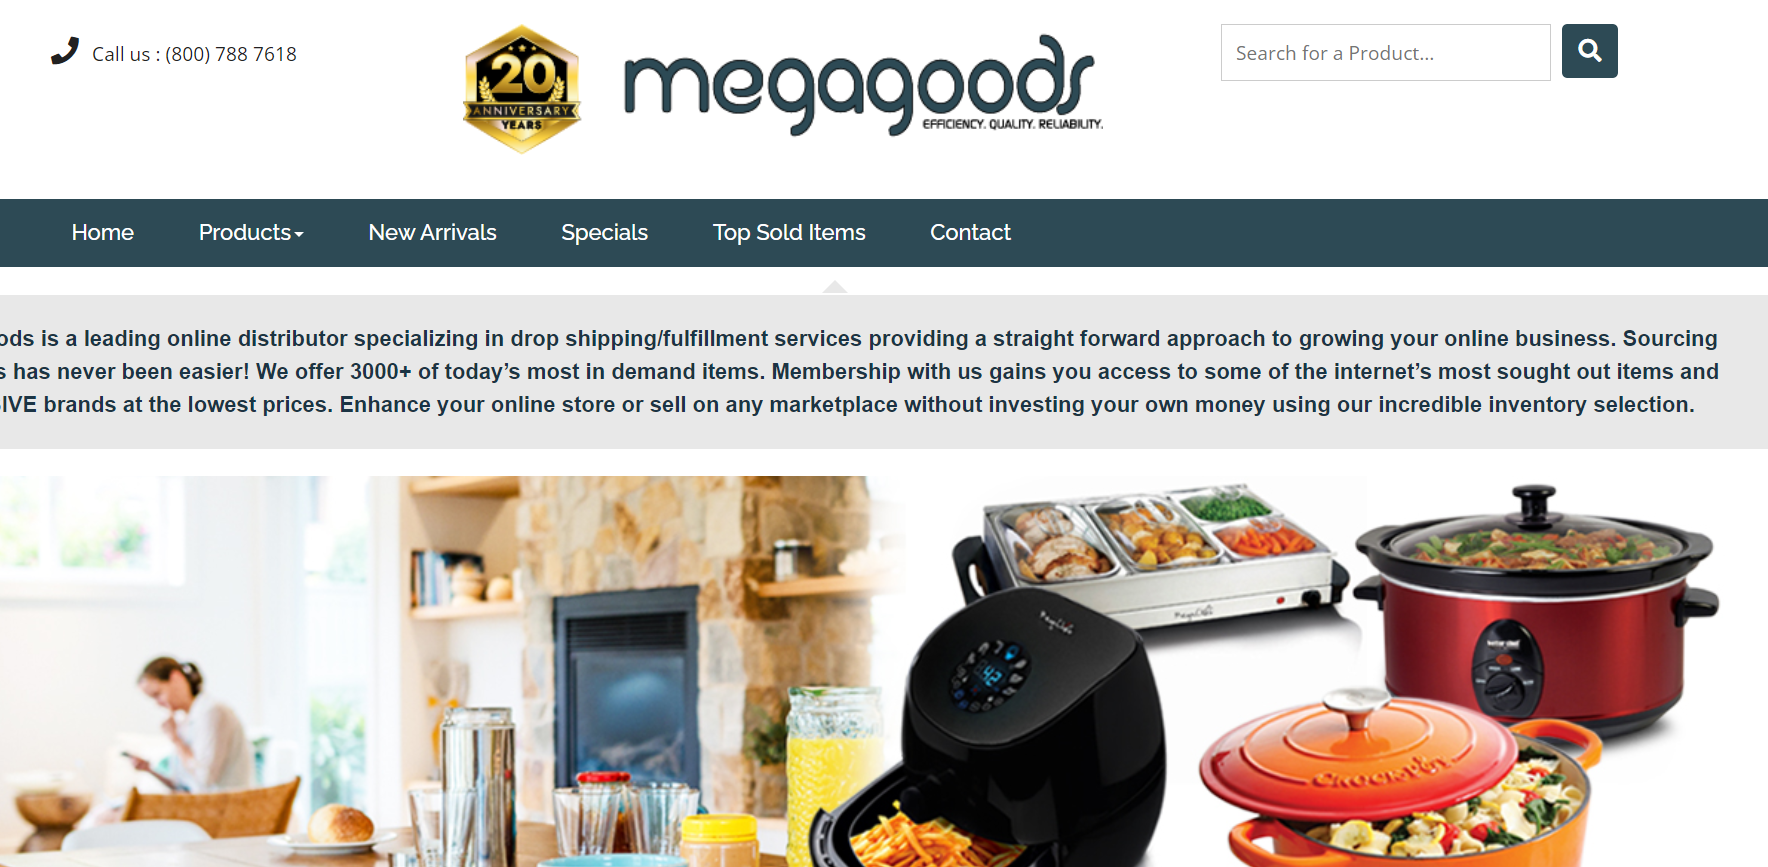 Megagoods specializes in consumer electronics and charges a $1.50 fee per order with no minimum purchase requirement, making it efficient for dropshipping.